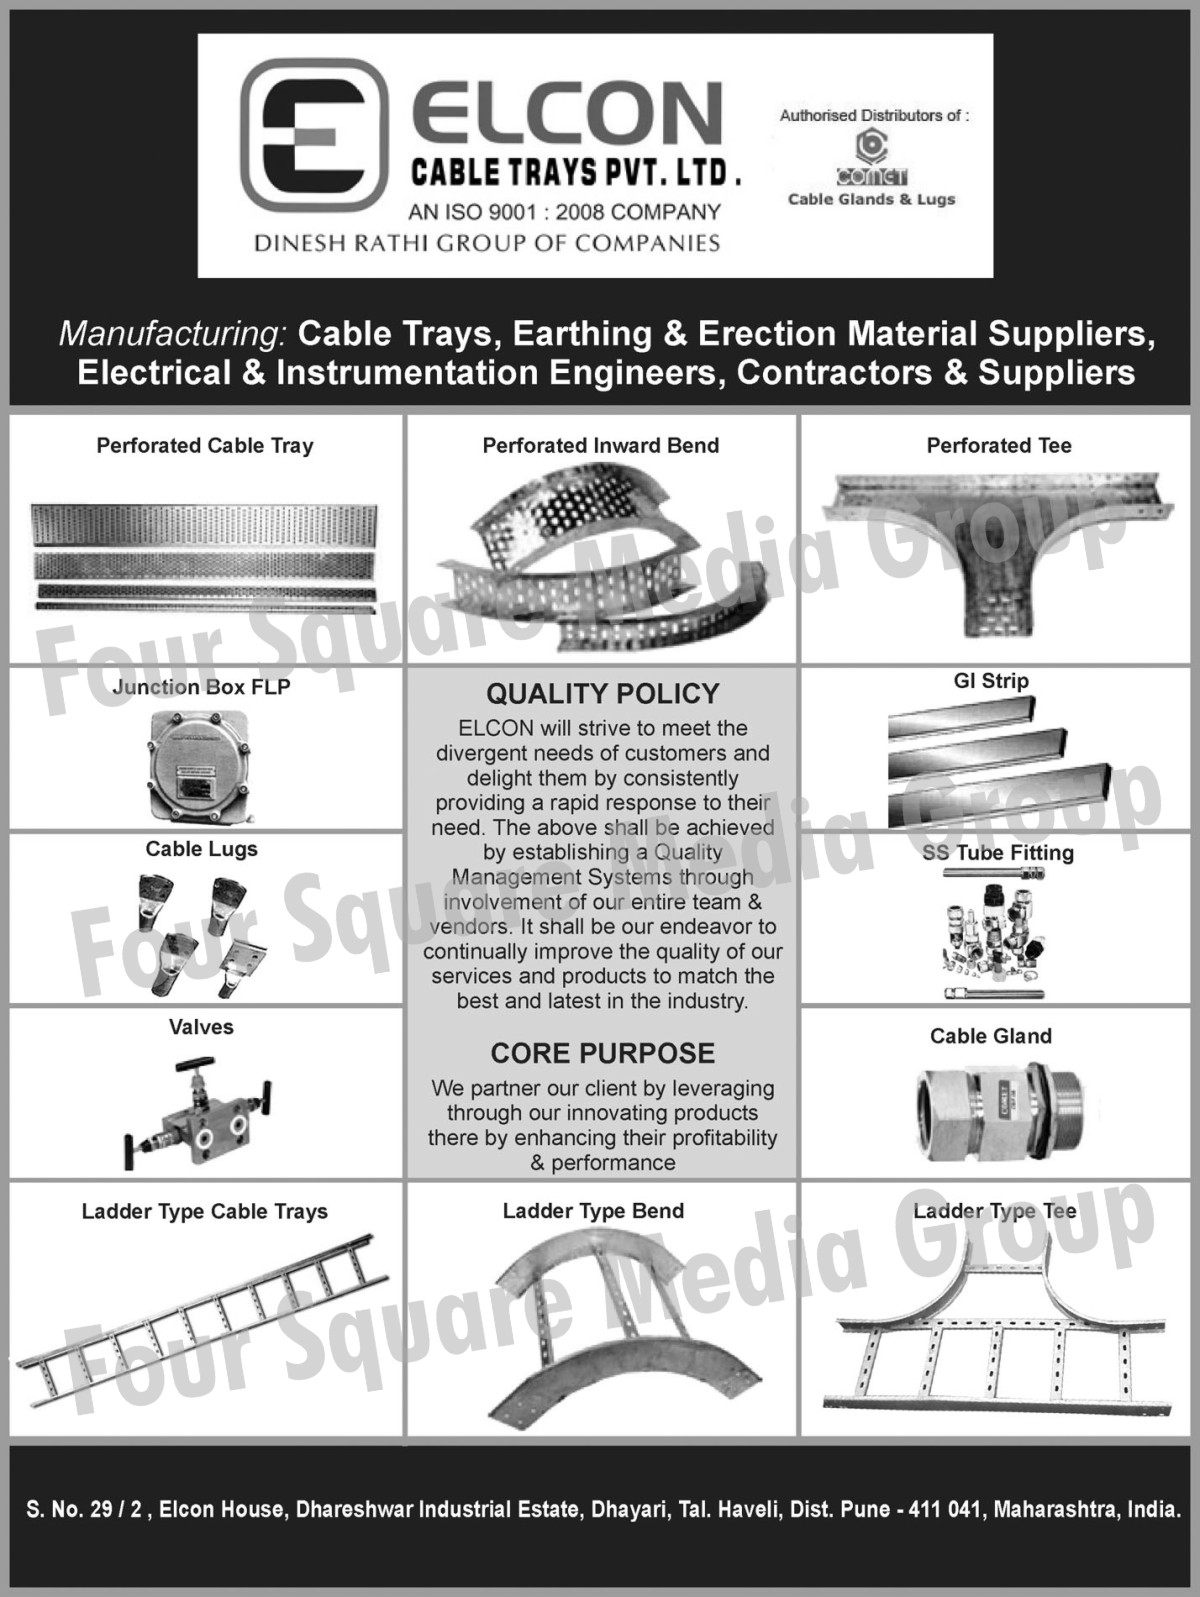 Cable Trays, Earthing Materials, Erection Materials, Electrical Engineers, Instrumentation Engineers, Perforated Cable Trays, Junction Box FLP, Cable Lugs, Ladder Type Cable Trays, Ladder Type Bands, Cable Gland, Ladder Type Tee, Stainless Steel Tube Fittings, GI Strips, Perforated Tee, Perforated Inward Bonds, Ladder Cable Trays